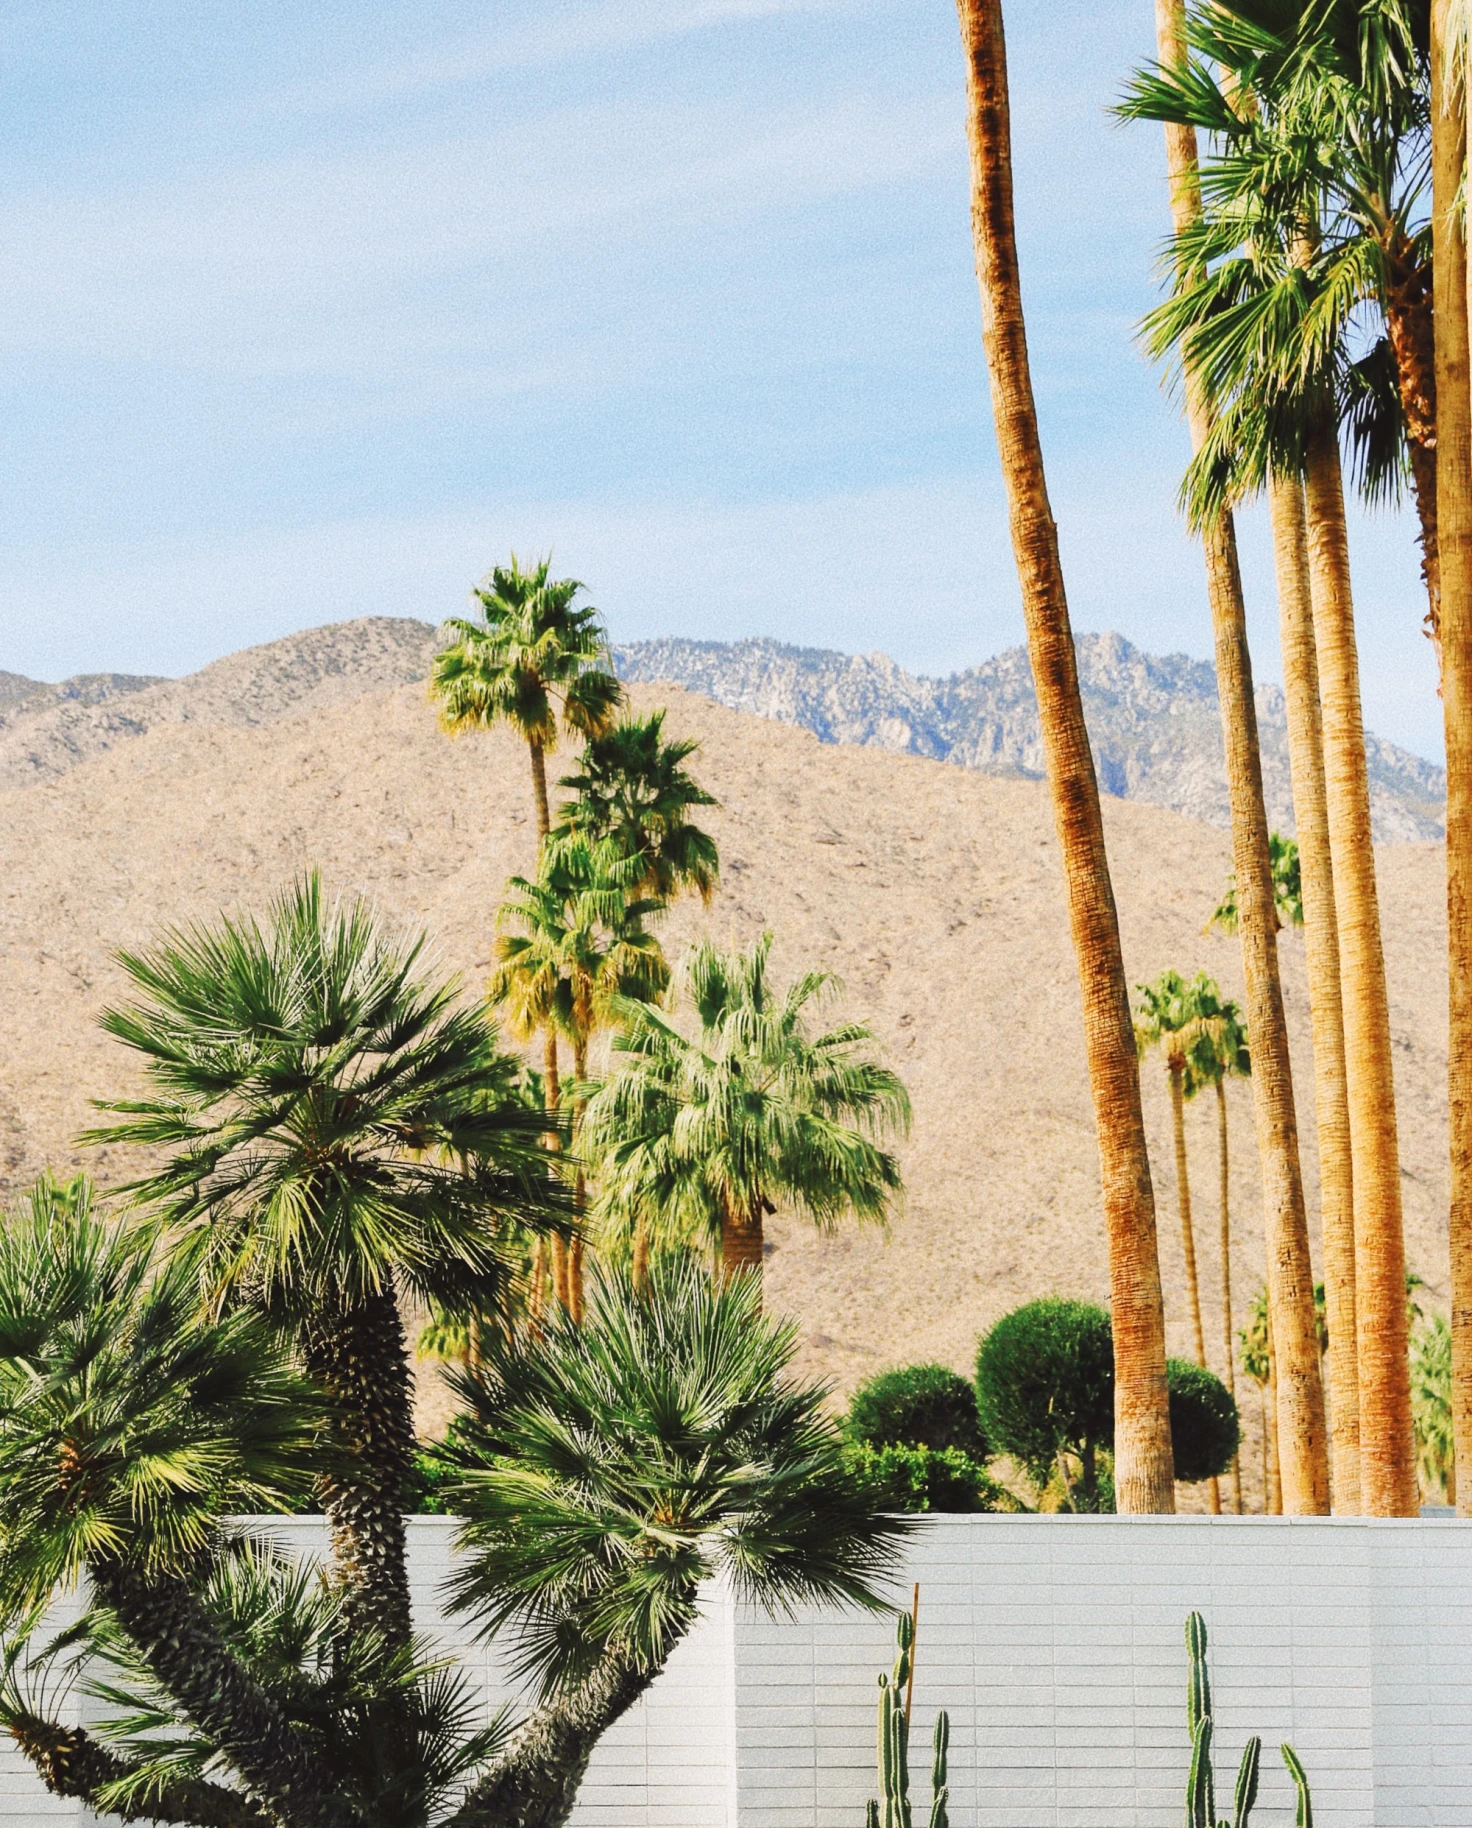 Palm trees next to white wall with mountains in the background during daytime